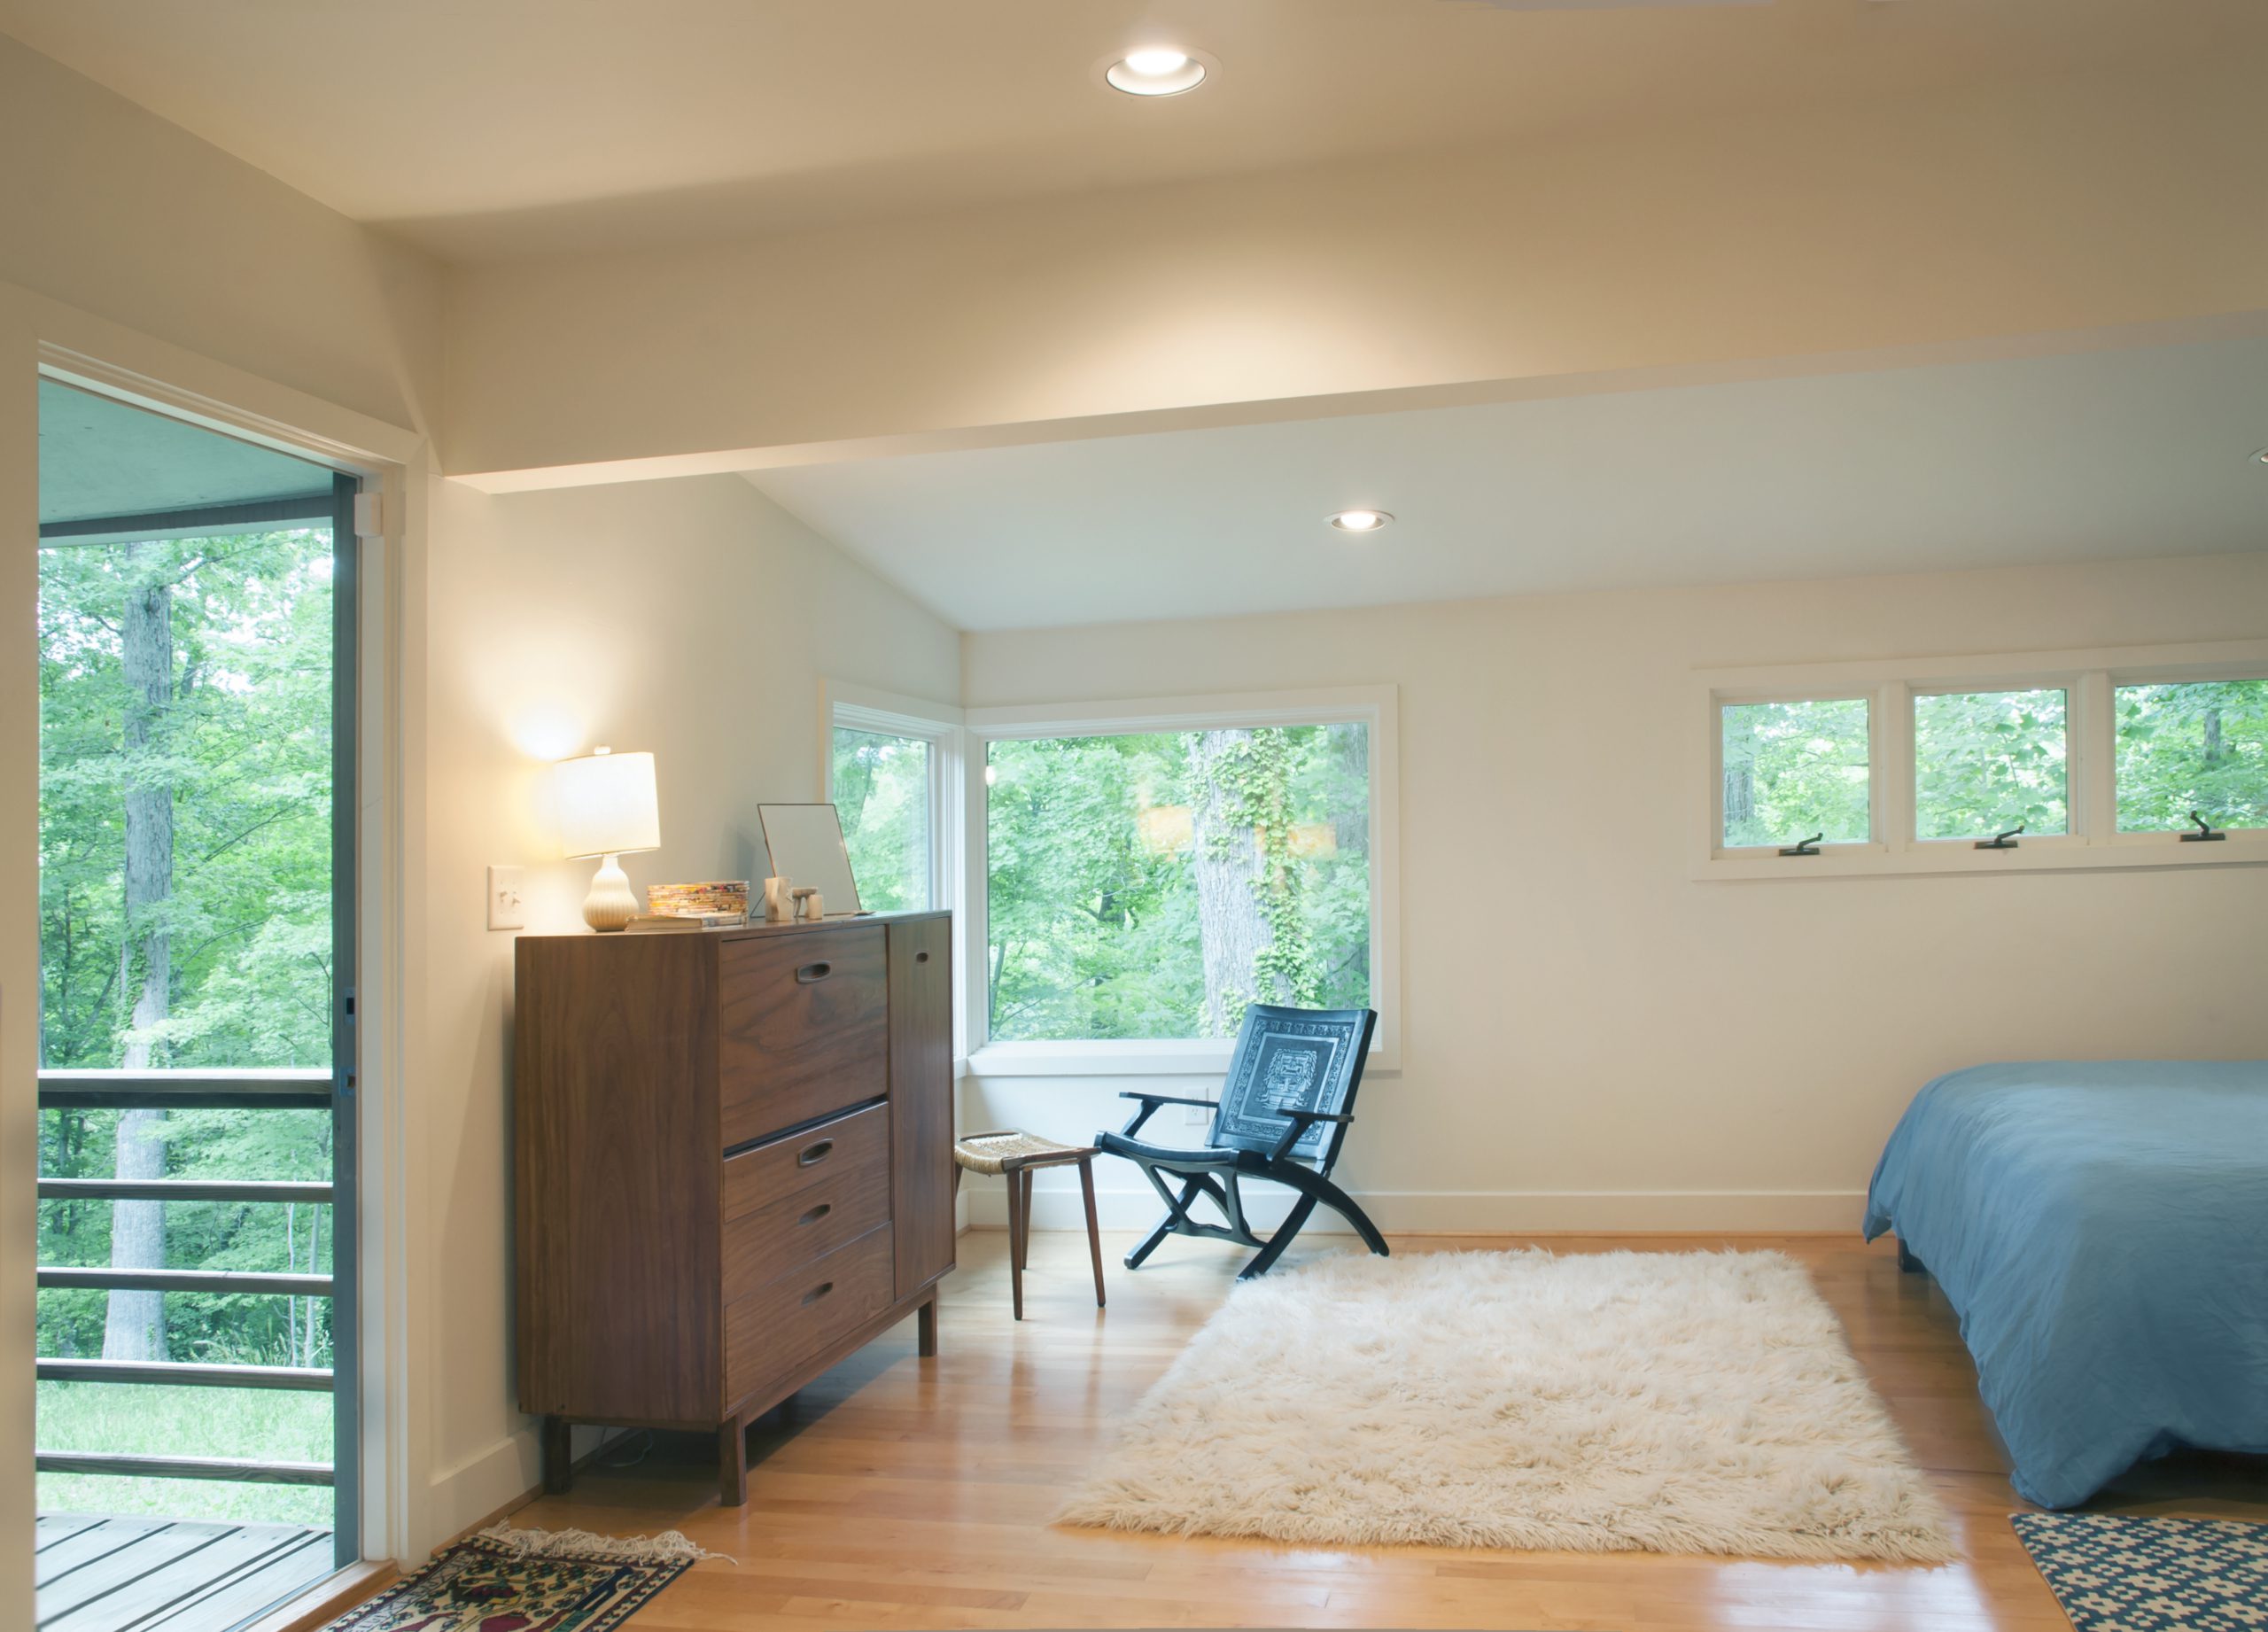 A simple yet sophisticated bedroom with a cozy seating area with corner windows and a door connecting the space to a porch